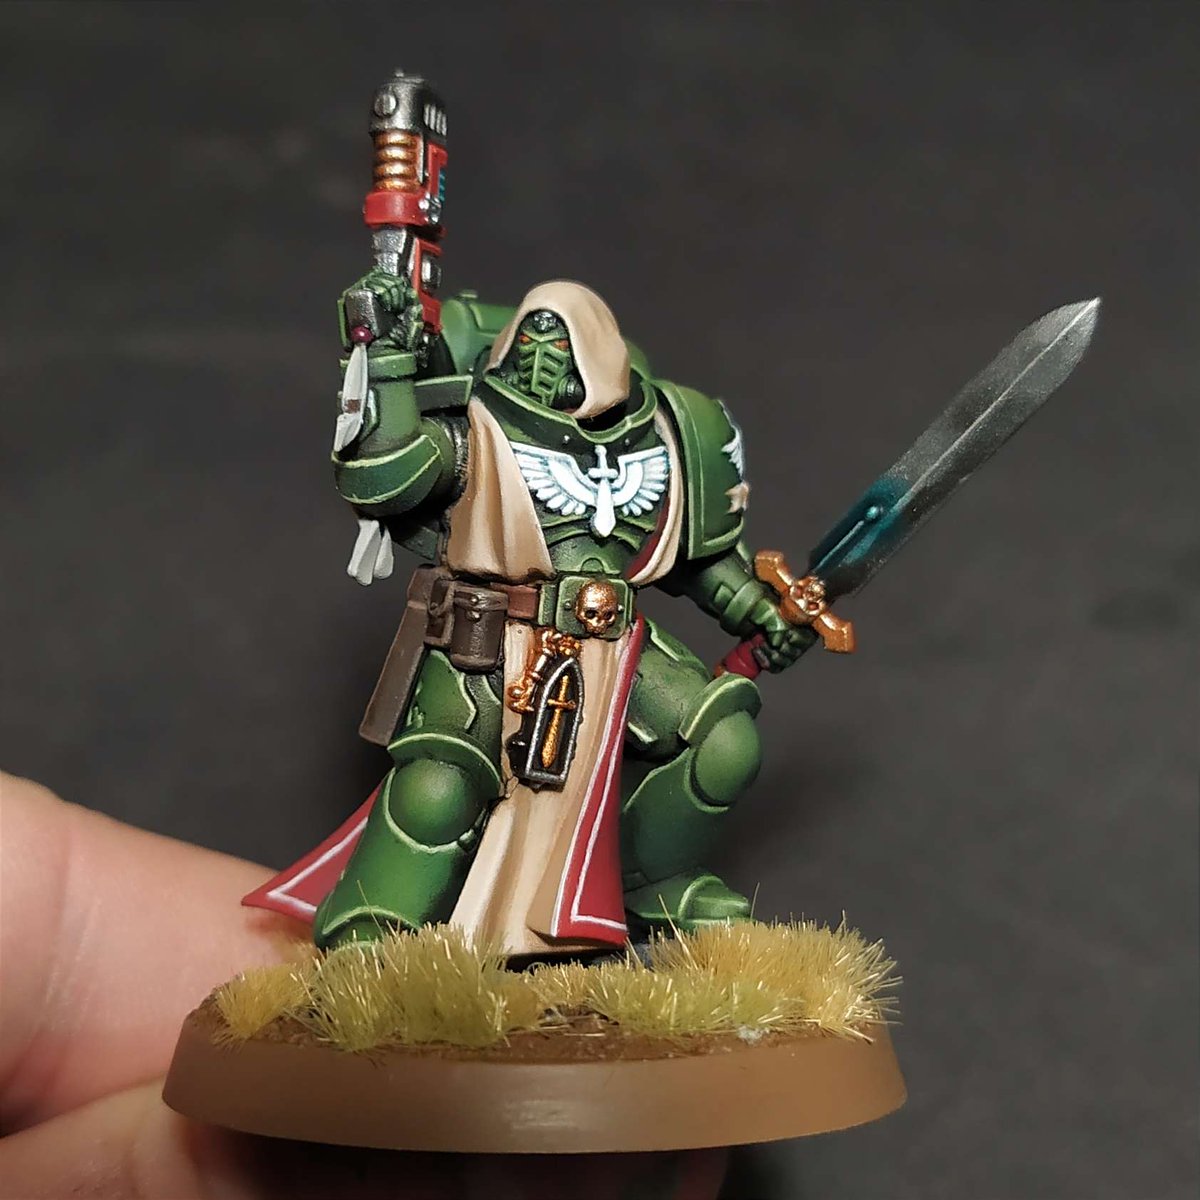 Finished this little friend ! He's not perfect but I like him a lot :D
I never played 10th yet, is it any good ?
#warhammer40k #WarhammerCommunity #darkangels #darkangels40k